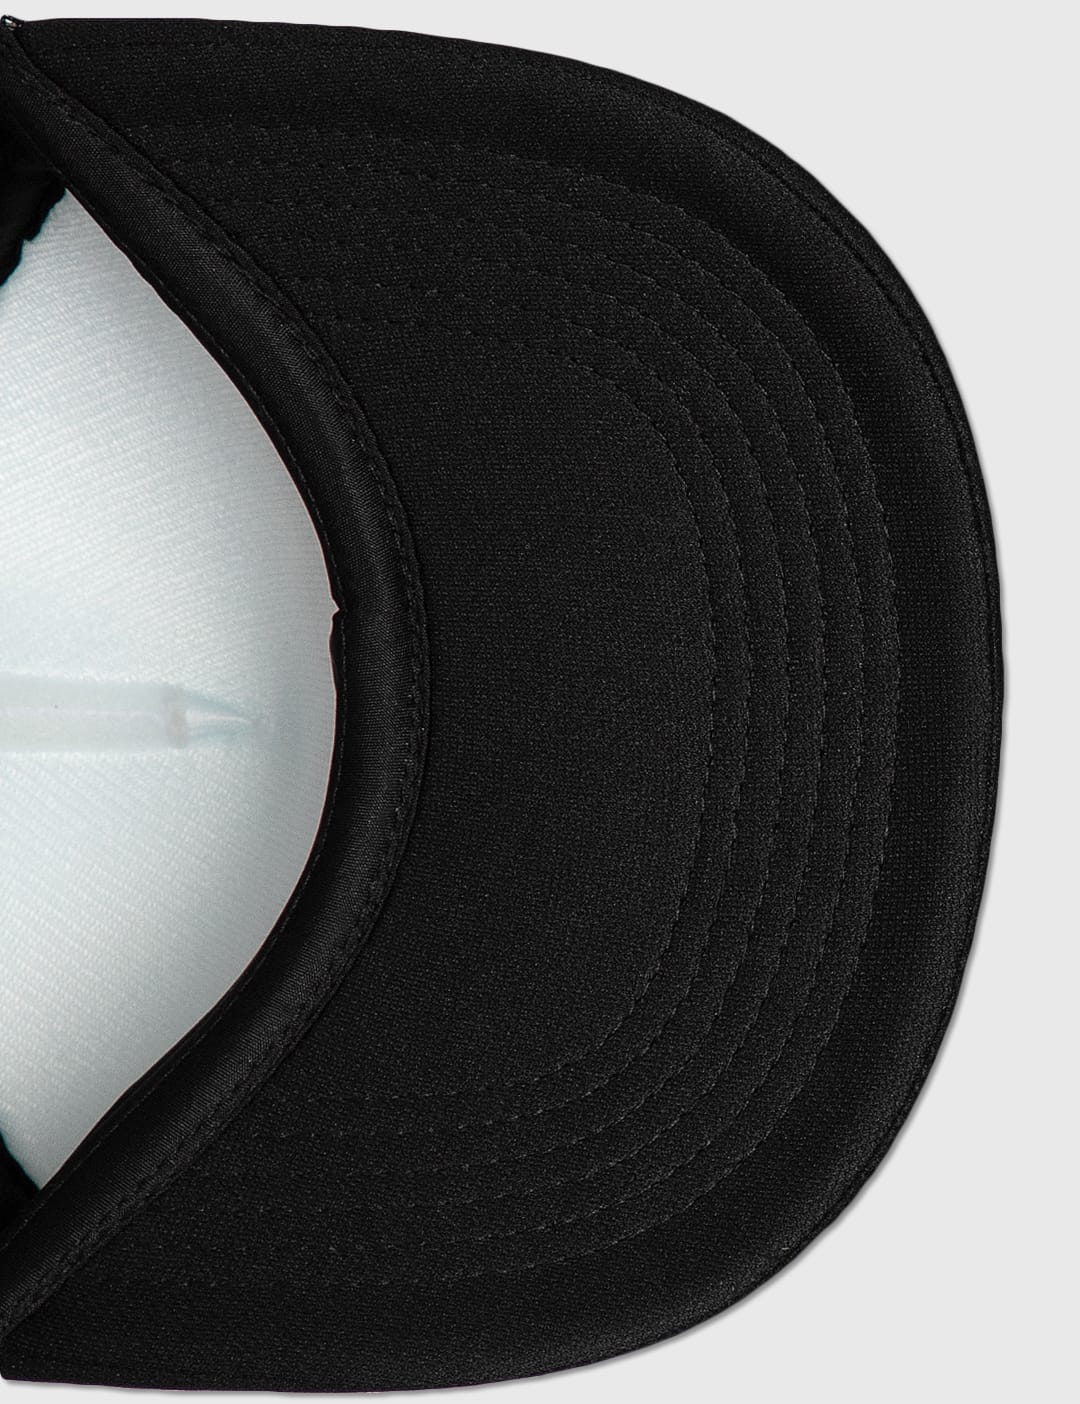 FR2 - American Logo Mesh Cap | HBX - Globally Curated Fashion and 